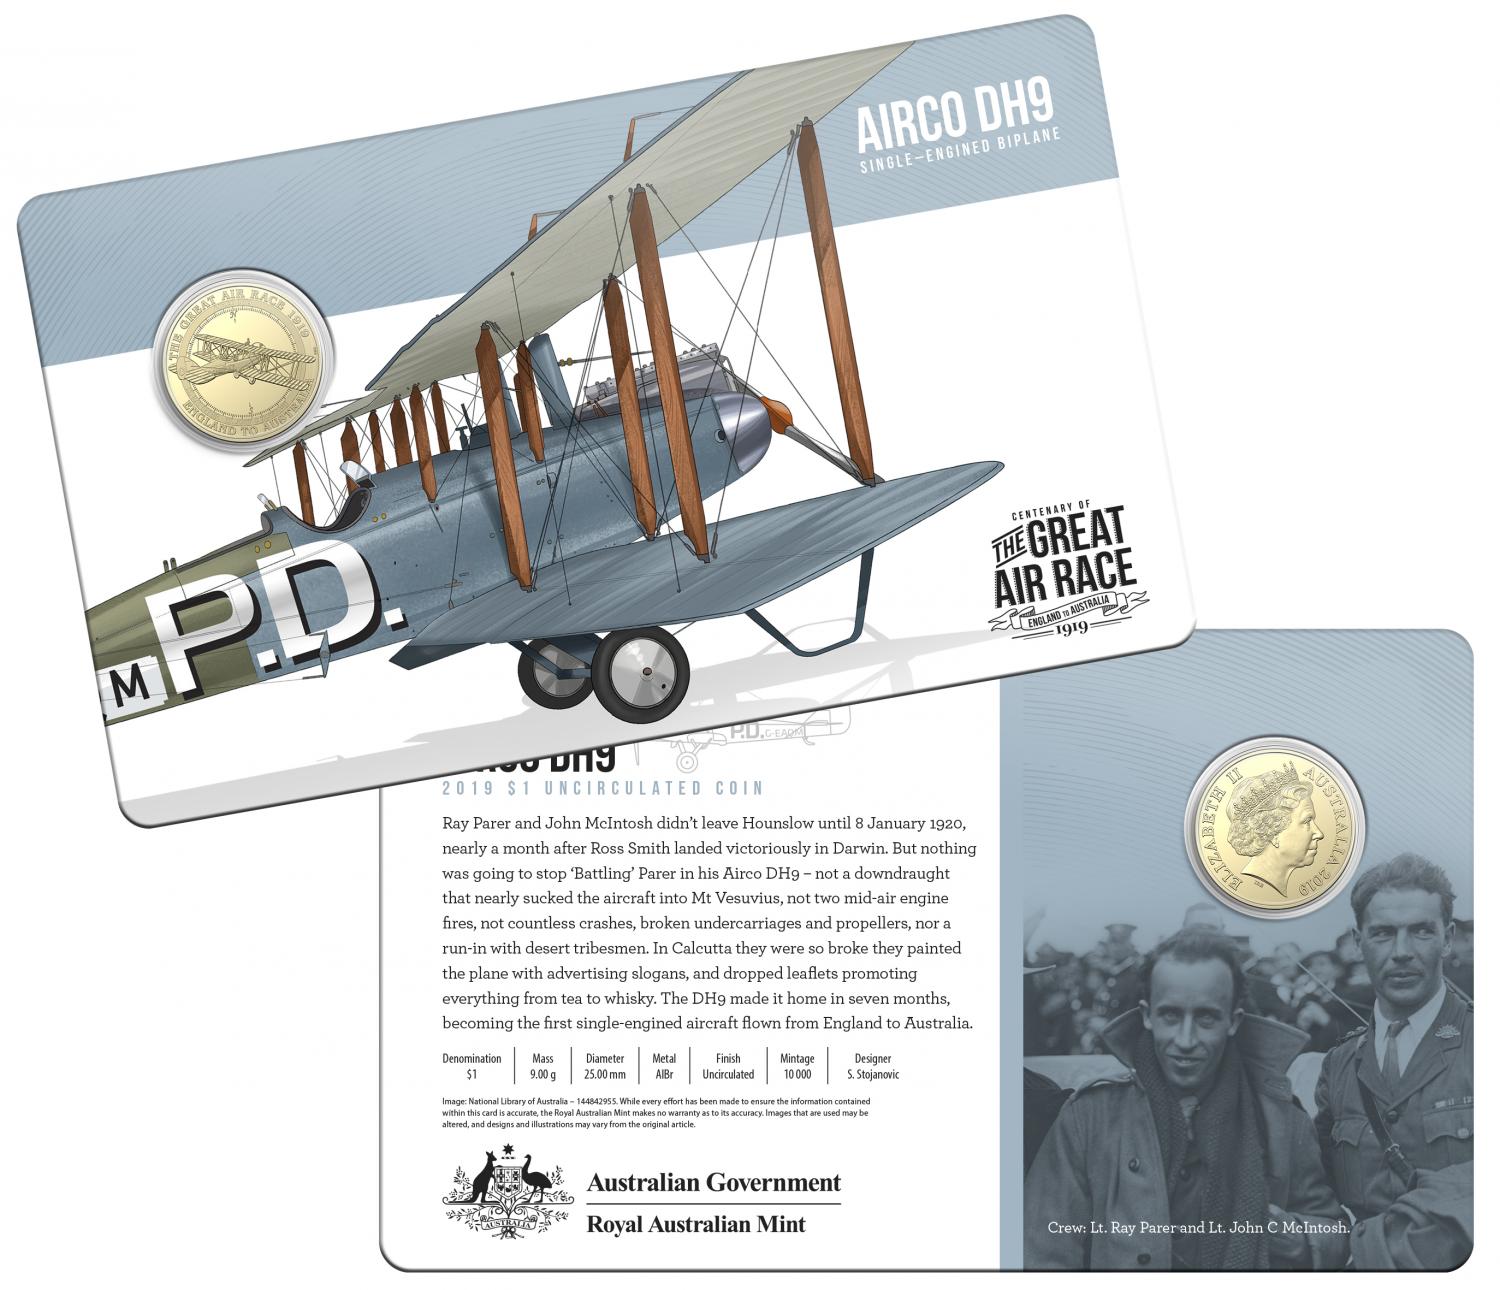 Thumbnail for 2019 Centenary off the Great Air Race Uncirculated $1.00 - Airco DH9